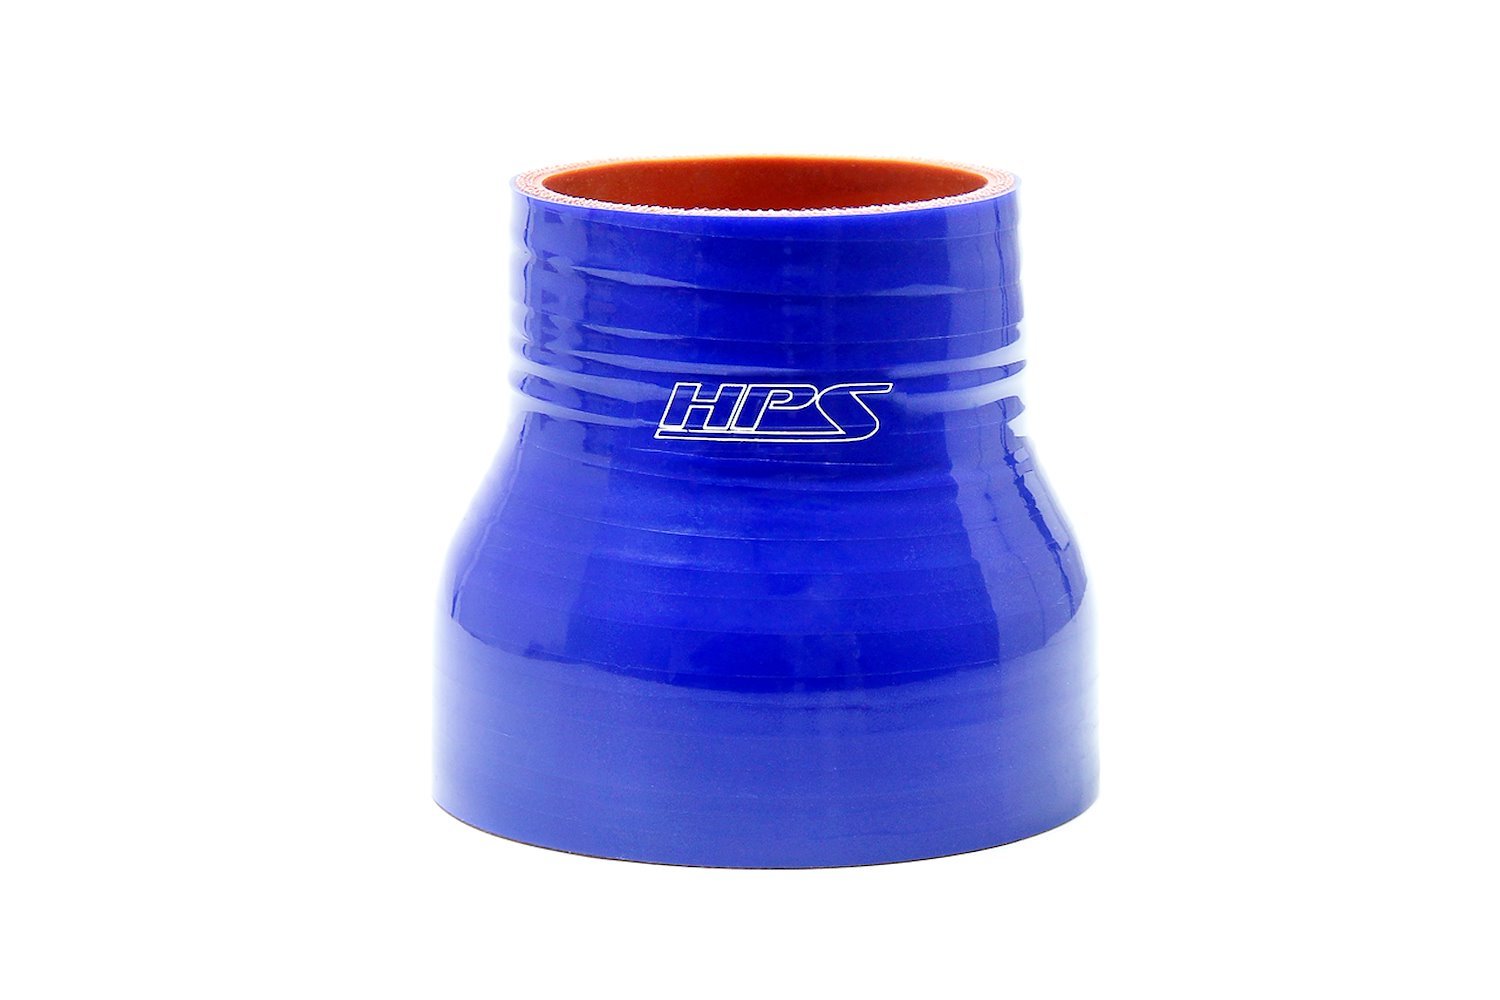 HTSR-250-300-L6-BLUE Silicone Reducer Hose, High-Temp 4-Ply Reinforced, 2-1/2 in. - 3 in. ID, 6 in. Long, Blue